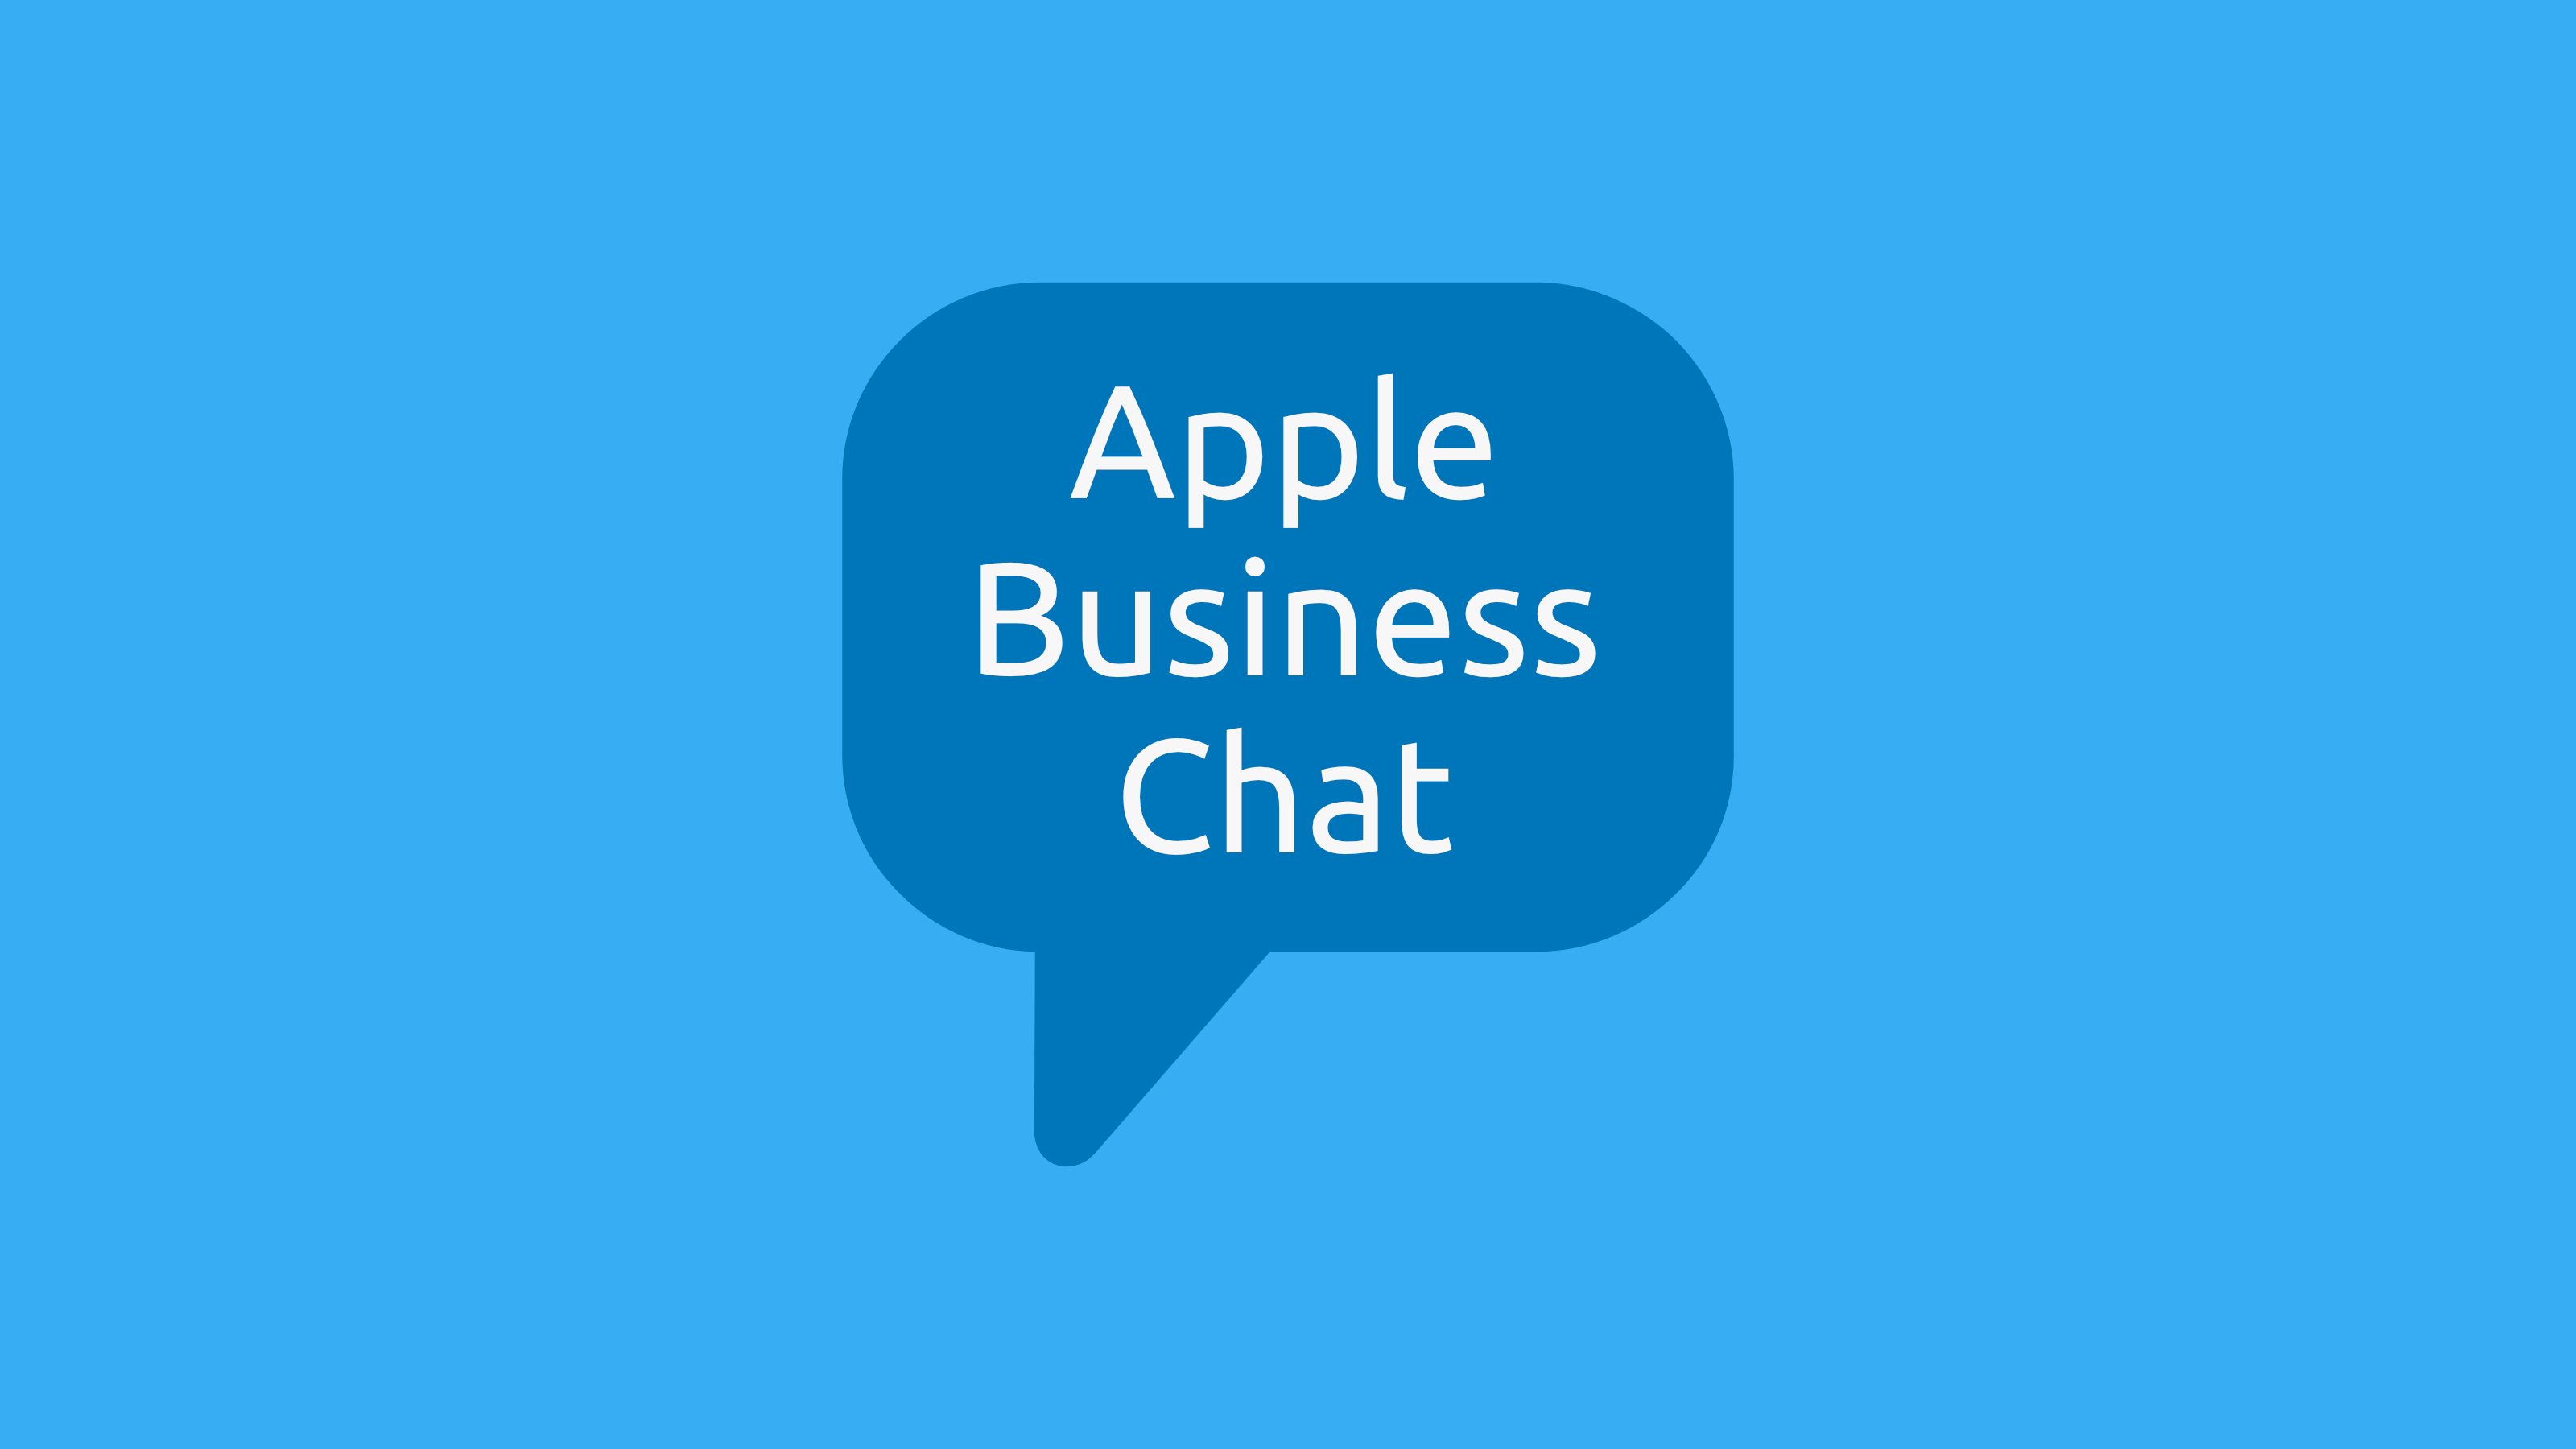 Messaging Apps & Brands Apple Business Chat